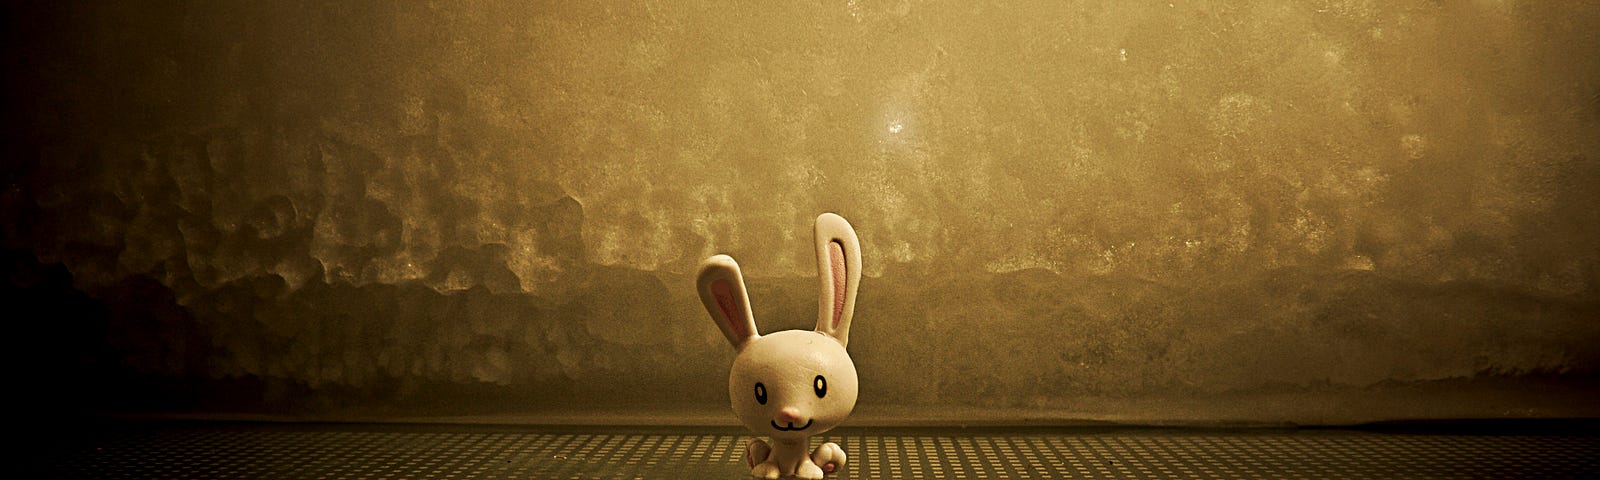 A white rabbit against a golden background